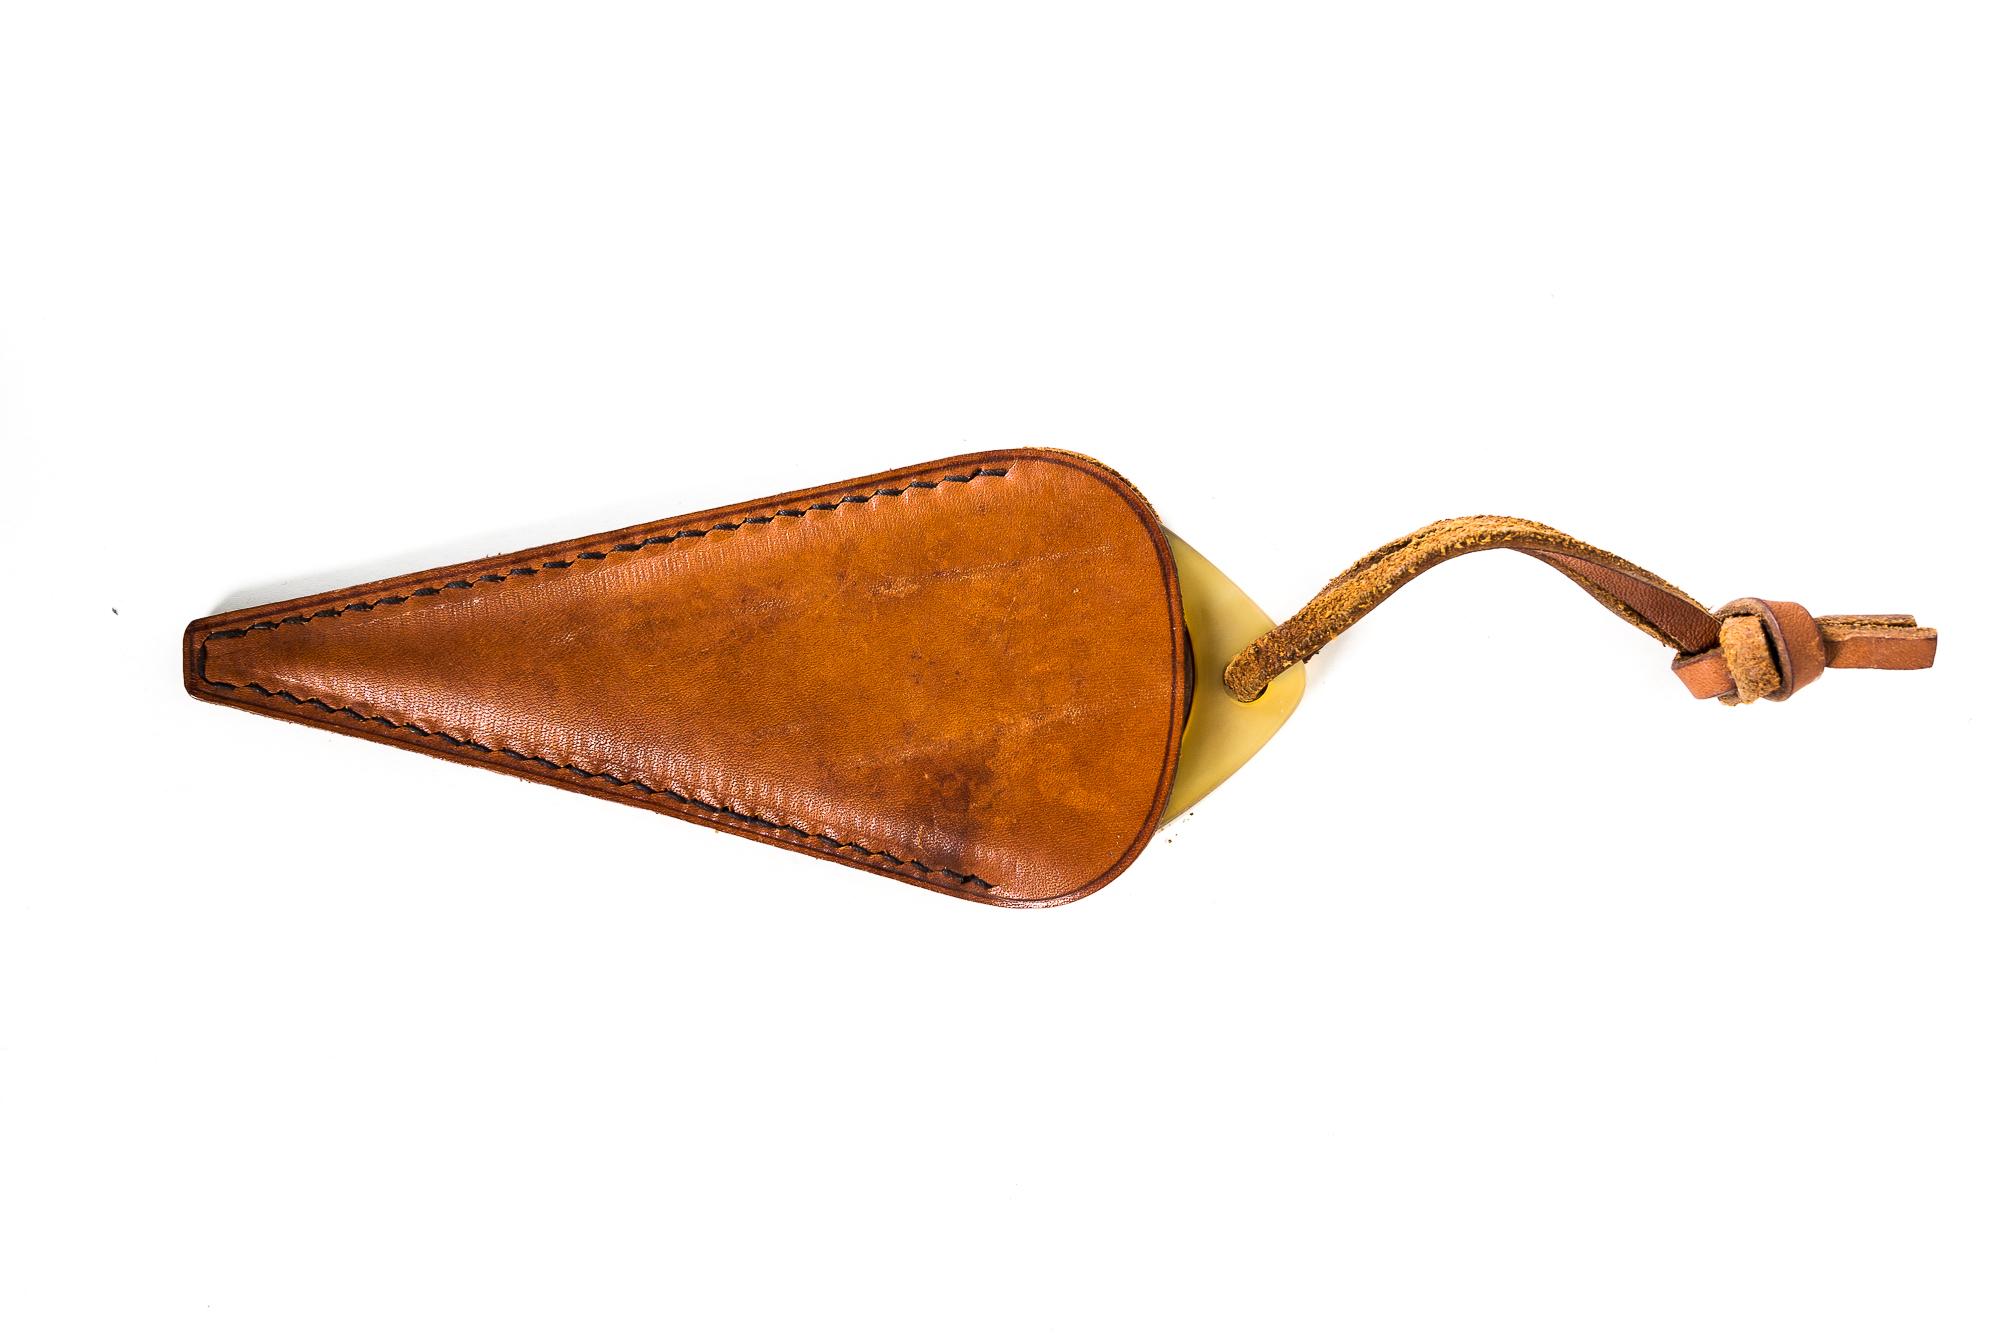 Austrian Carl Auböck Magnifying Glass with Leather Cover, Model 4998, Austria, 1959